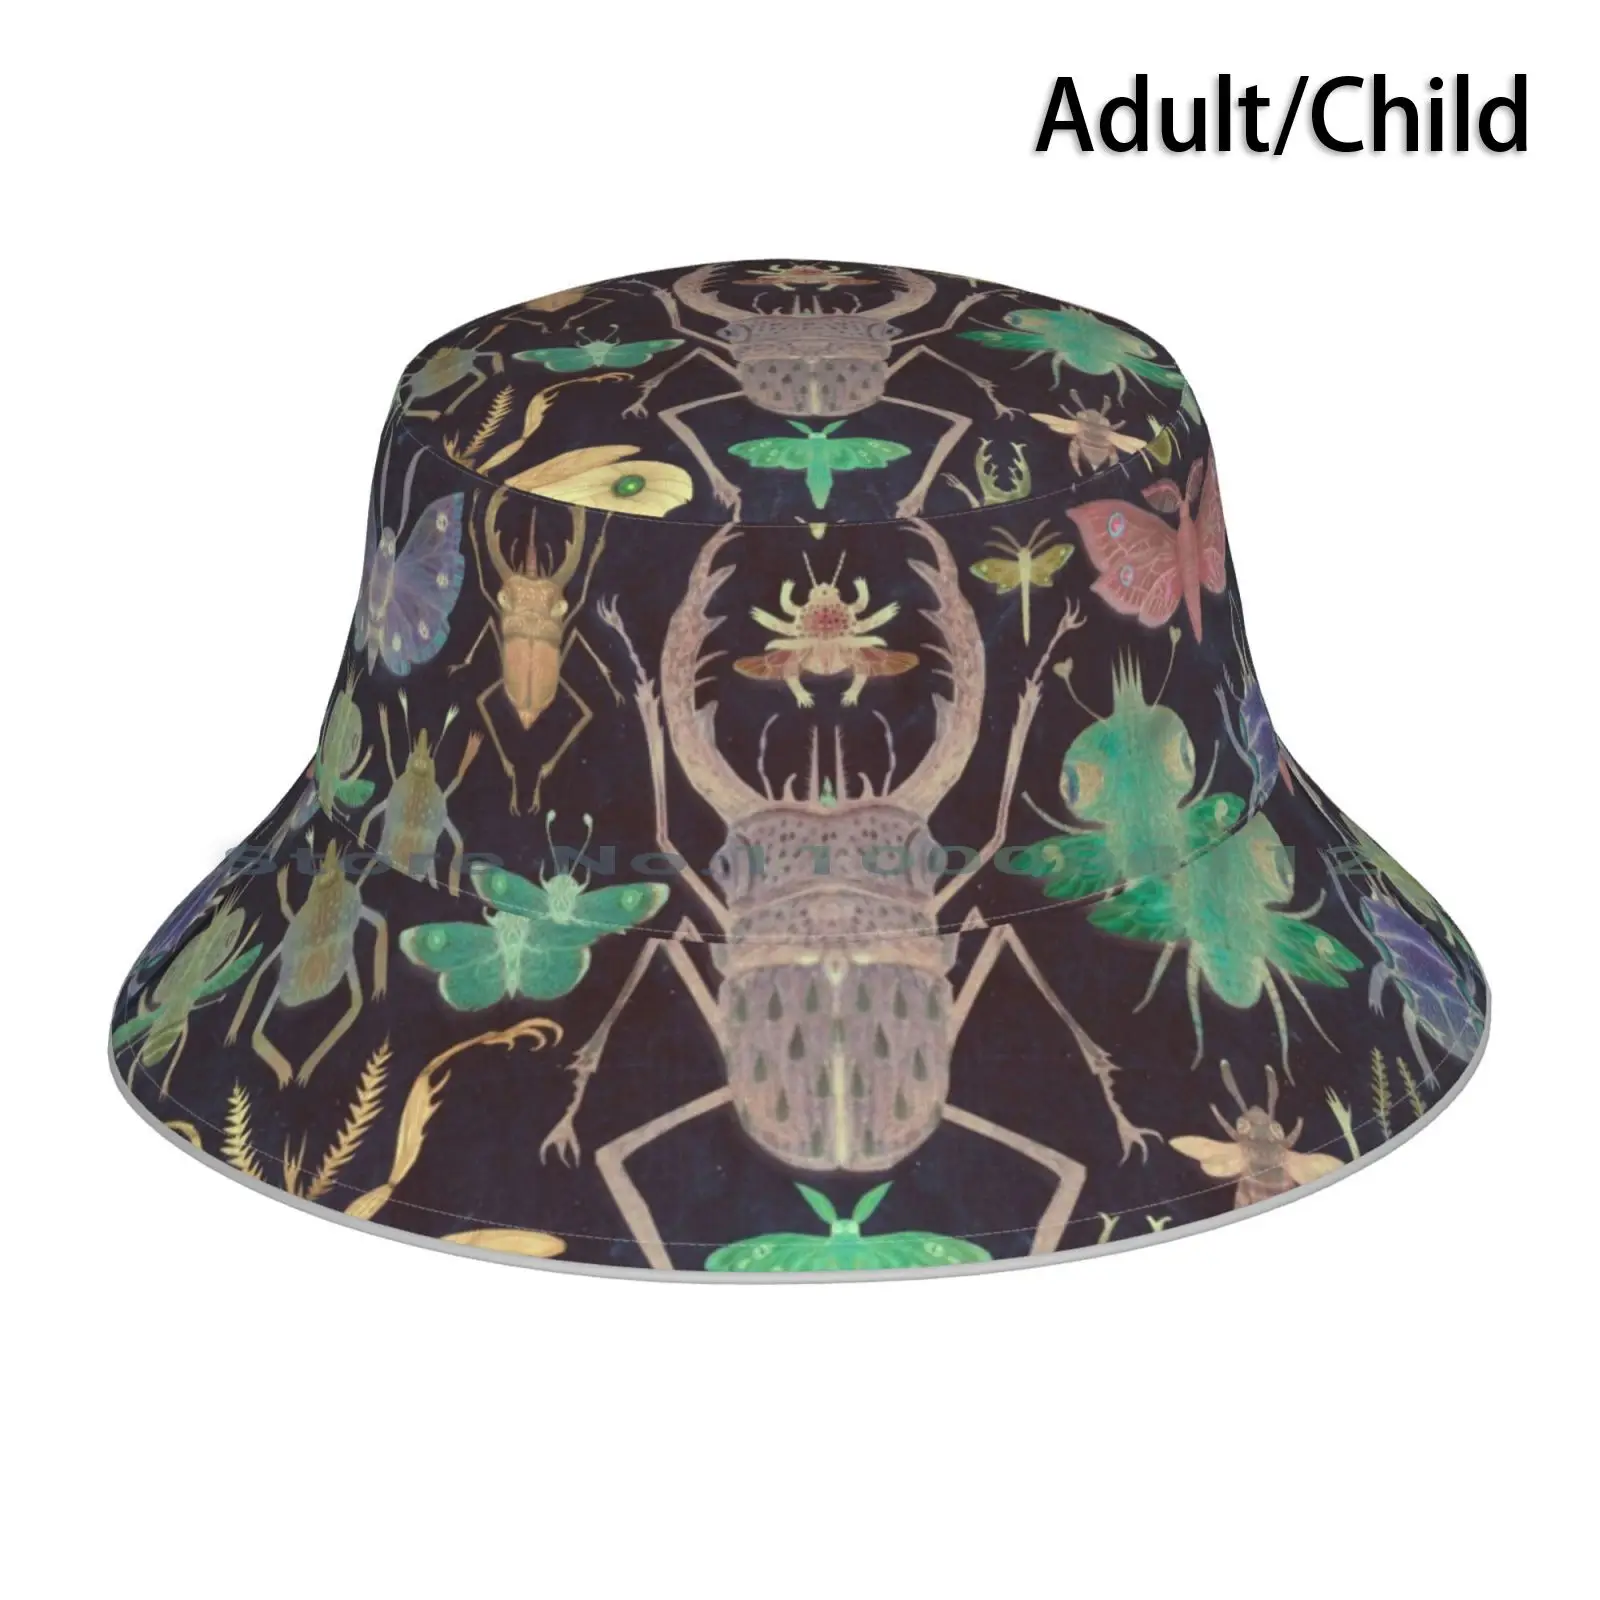 

Entomologist's Wish ( The Neon Version ) Bucket Hat Sun Cap Insect Hawkmoth Stag Beetle Vintage Retro Science Natural History